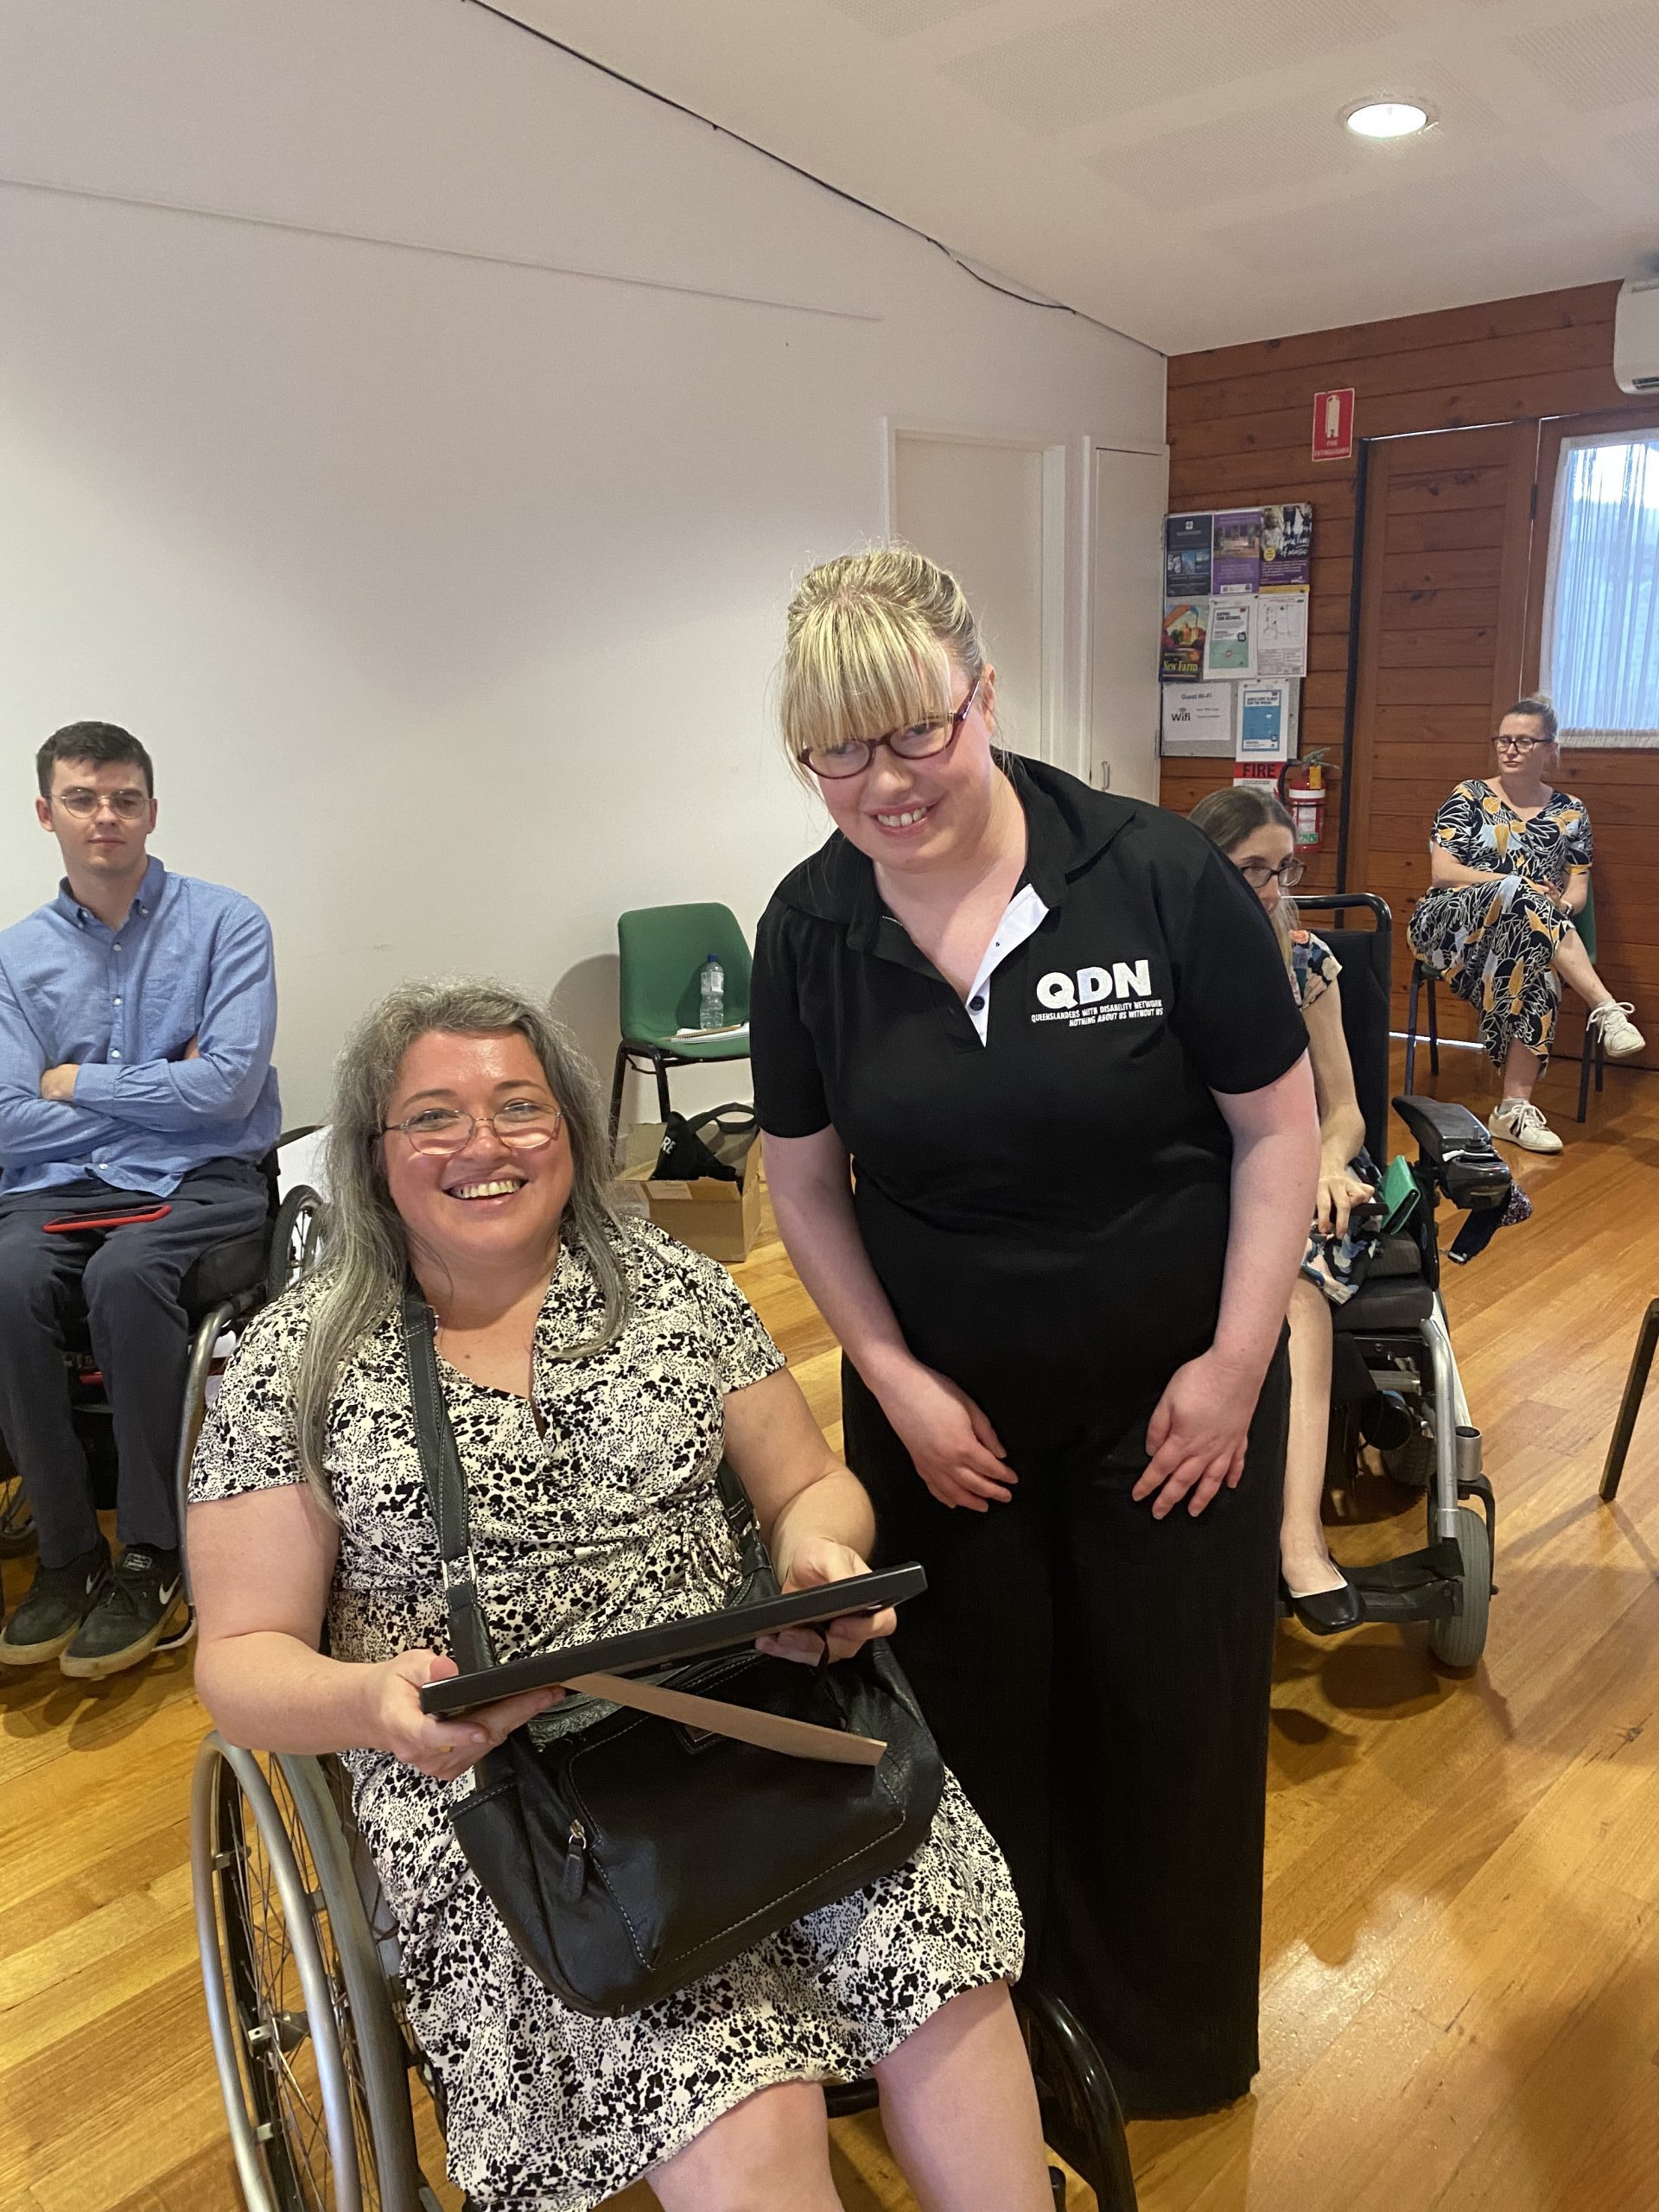 A woman sitting a wheelchair and another woman standing next to her. They are both smiling into the camera.